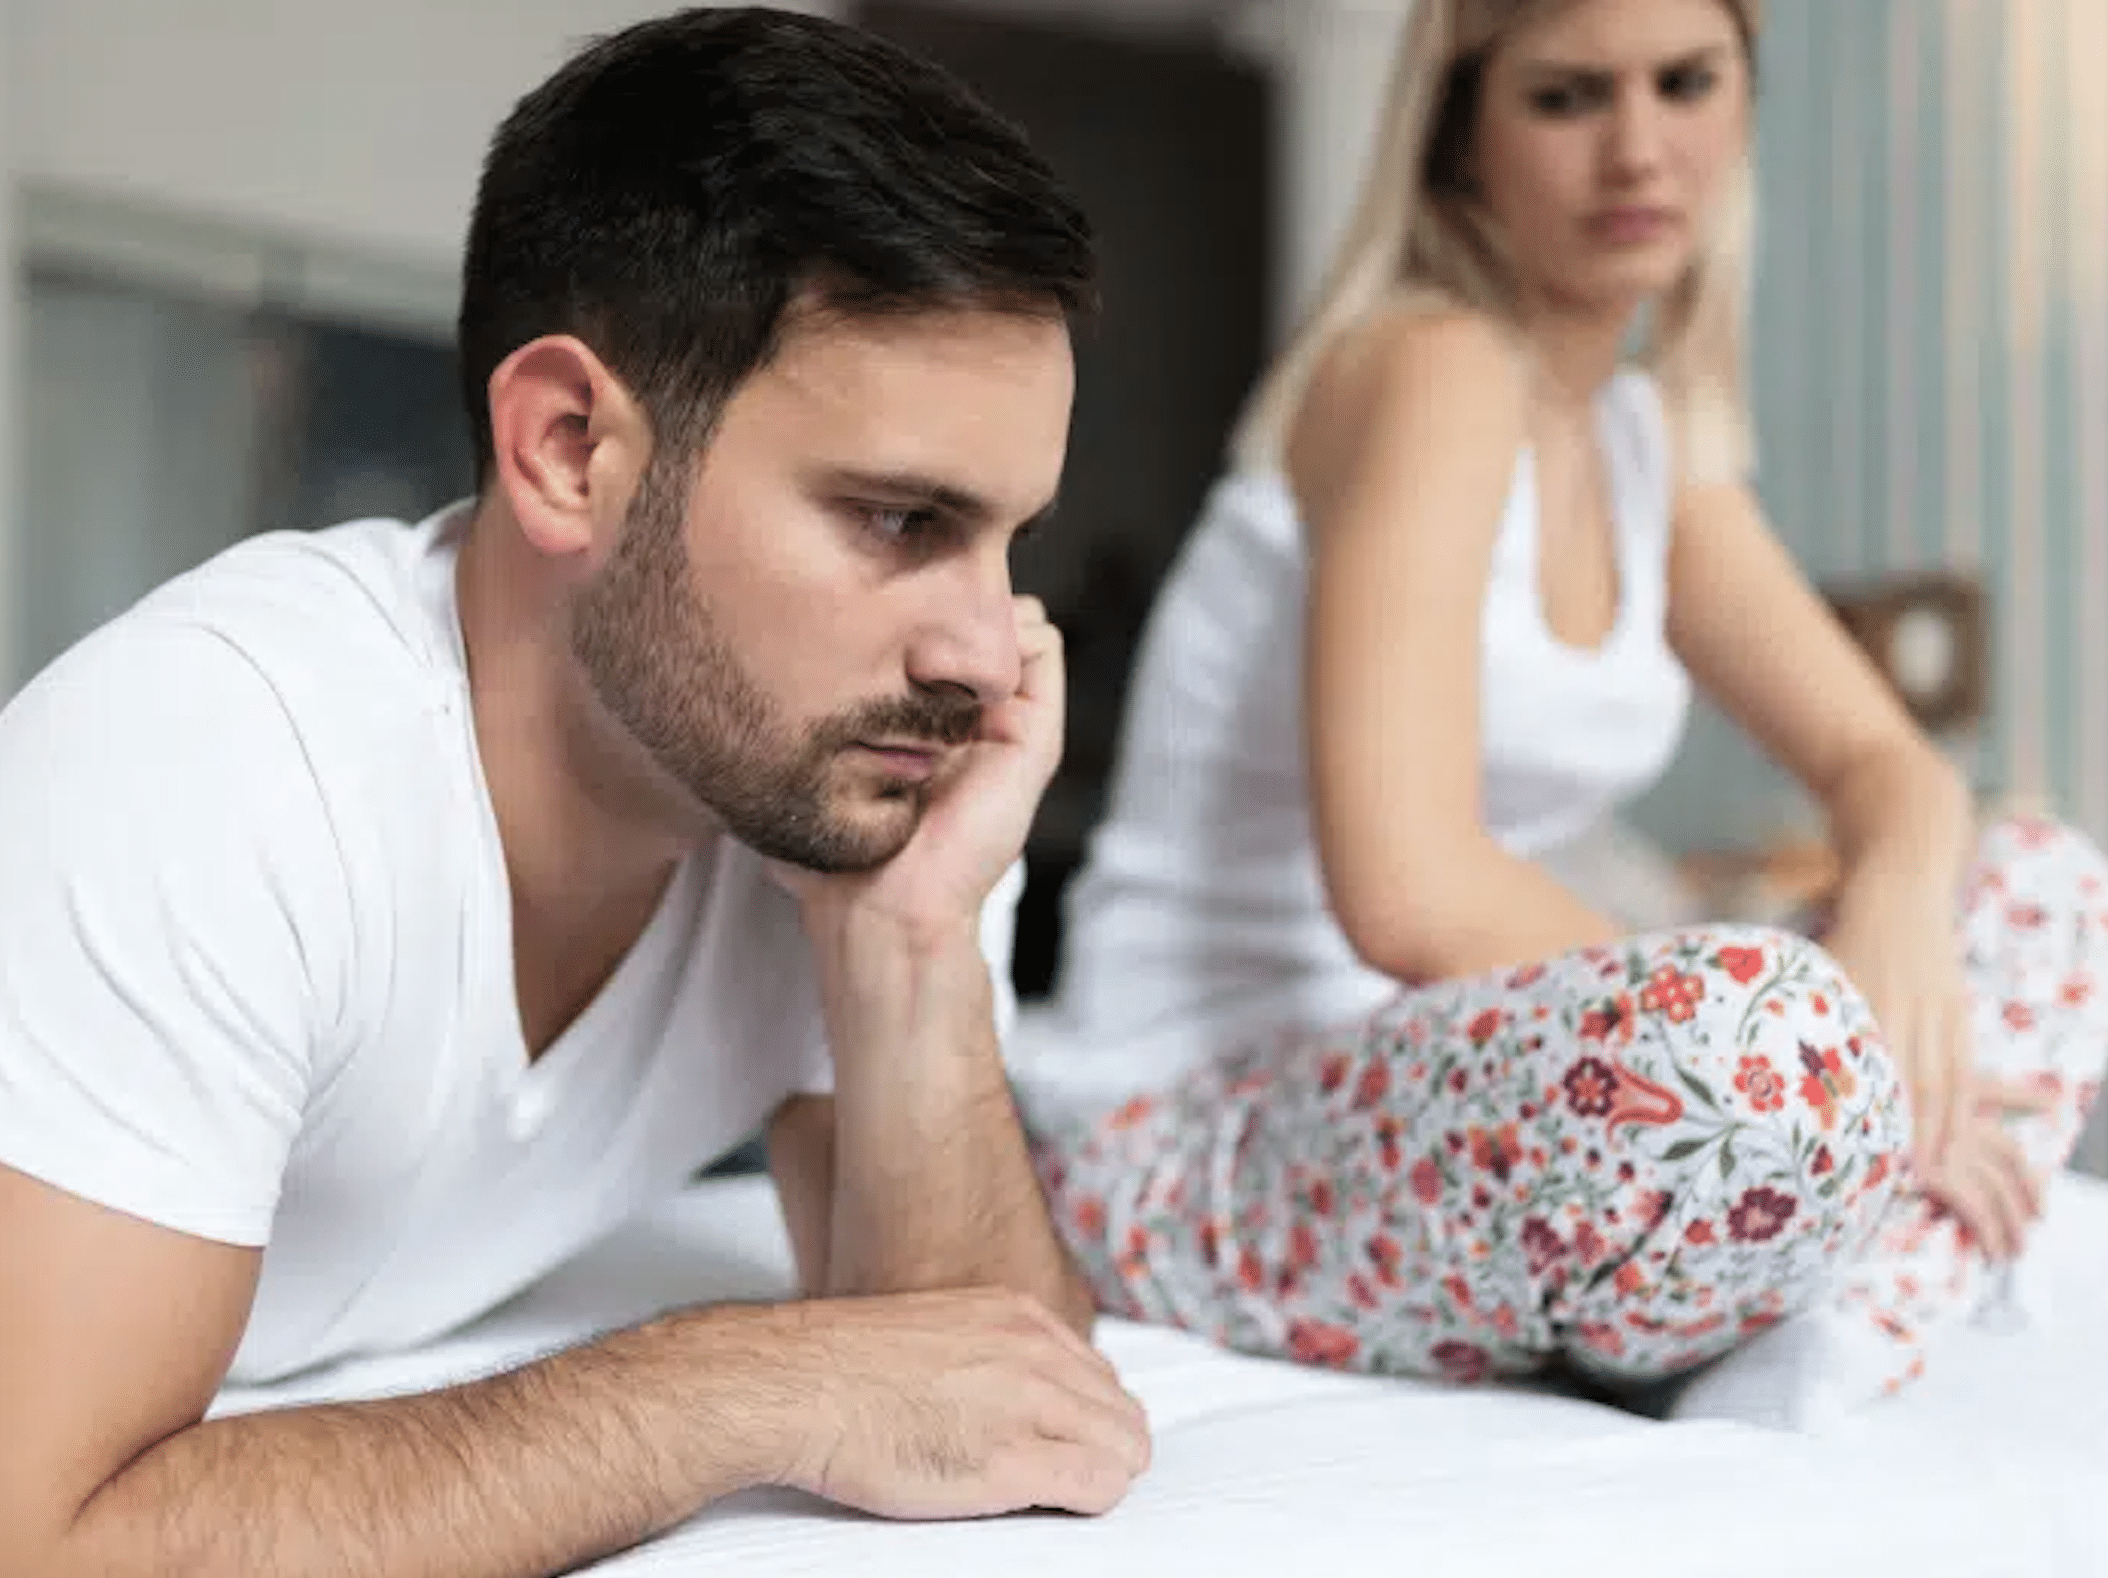 Signs another woman is attracted to your husband